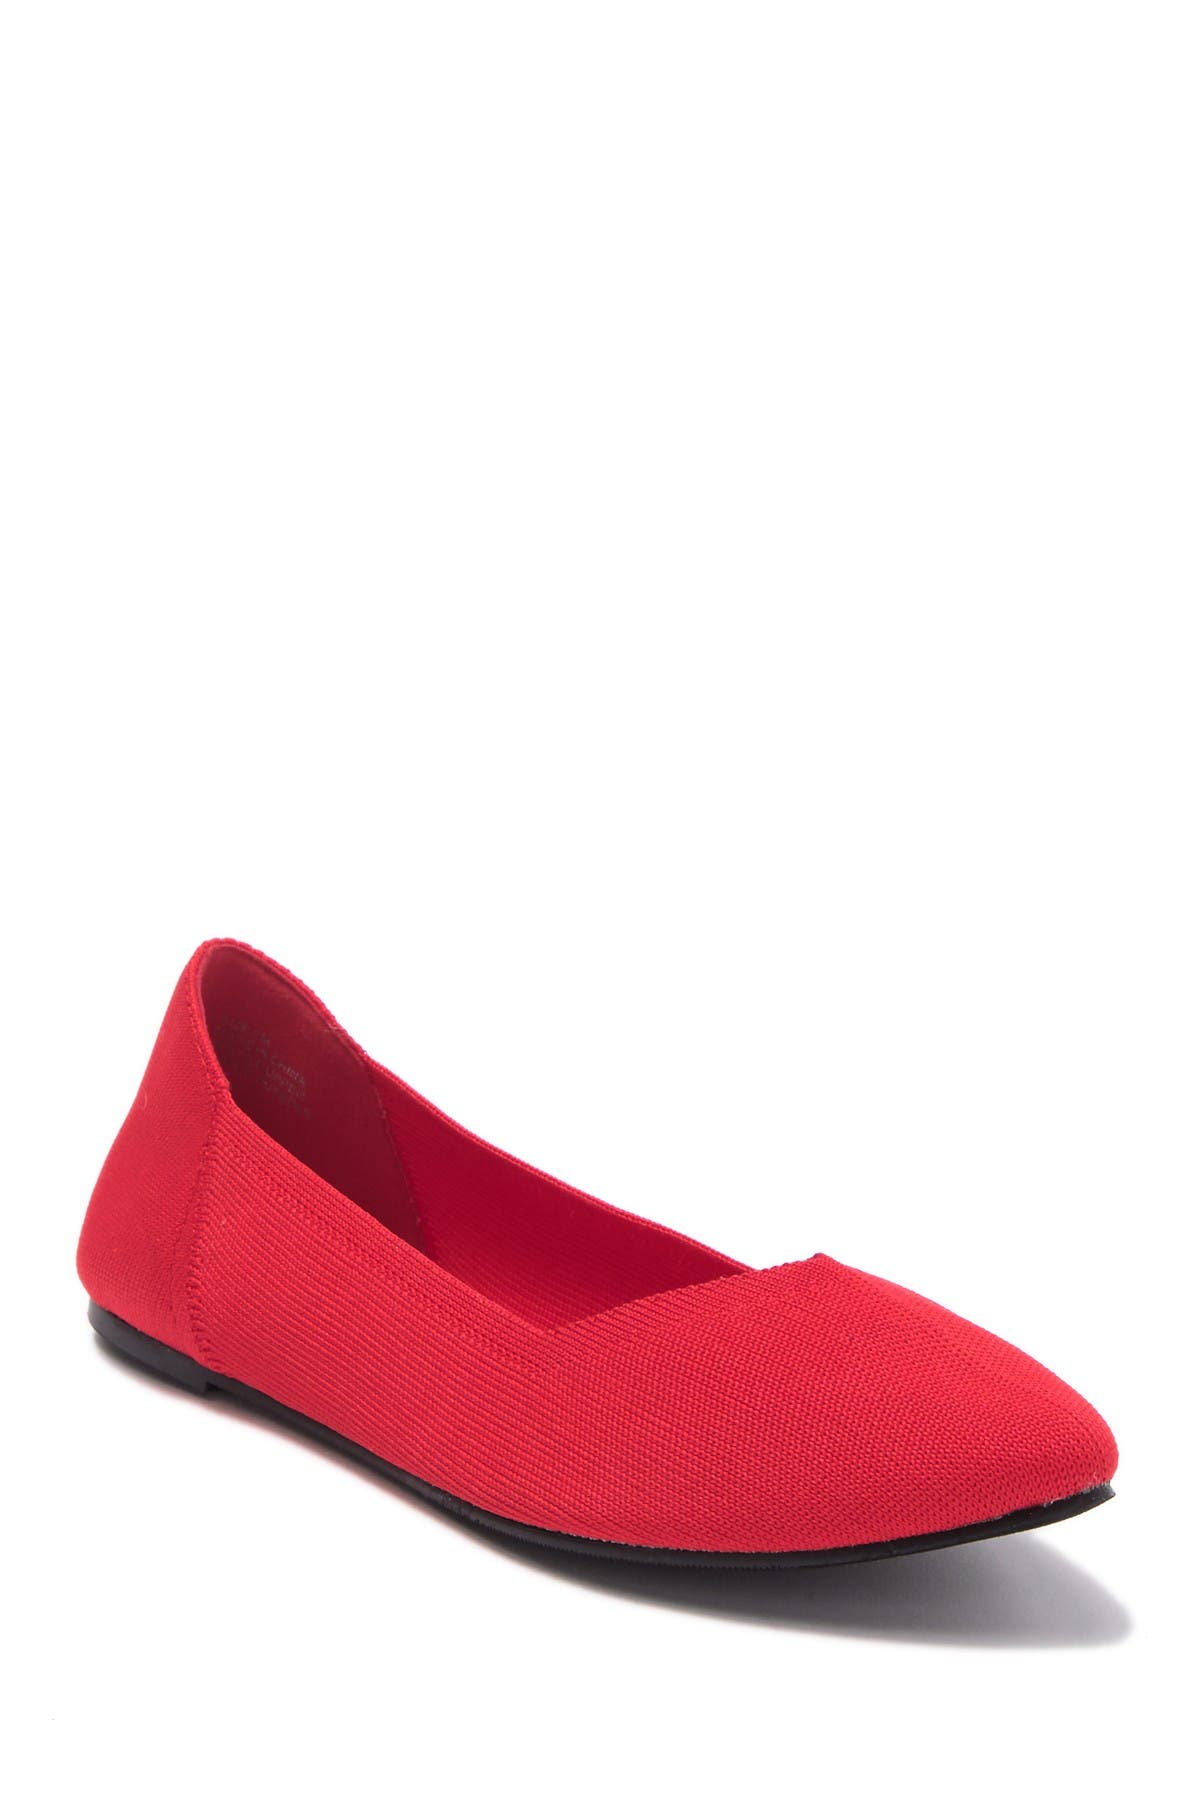 Mia Kerri Pointed Toe Flat In Red Fly Kn